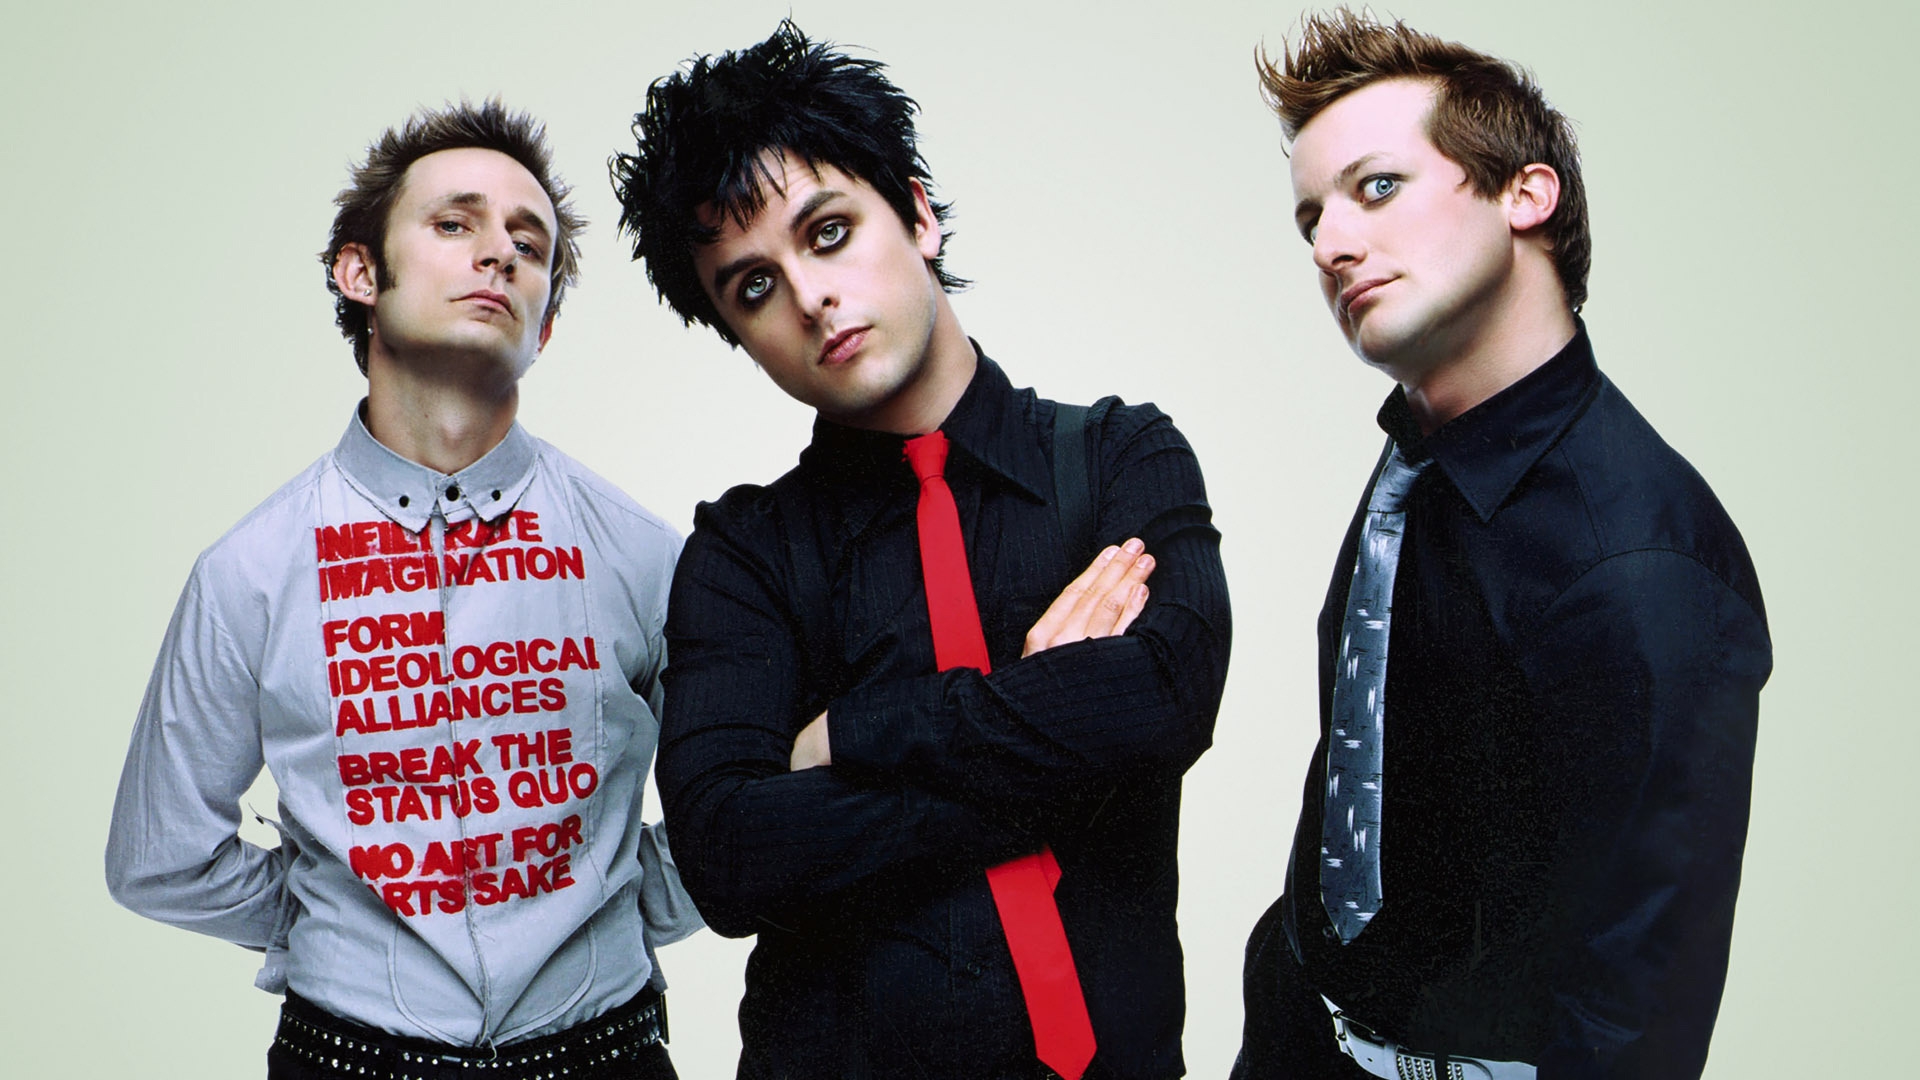 Green Day Band for 1920 x 1080 HDTV 1080p resolution